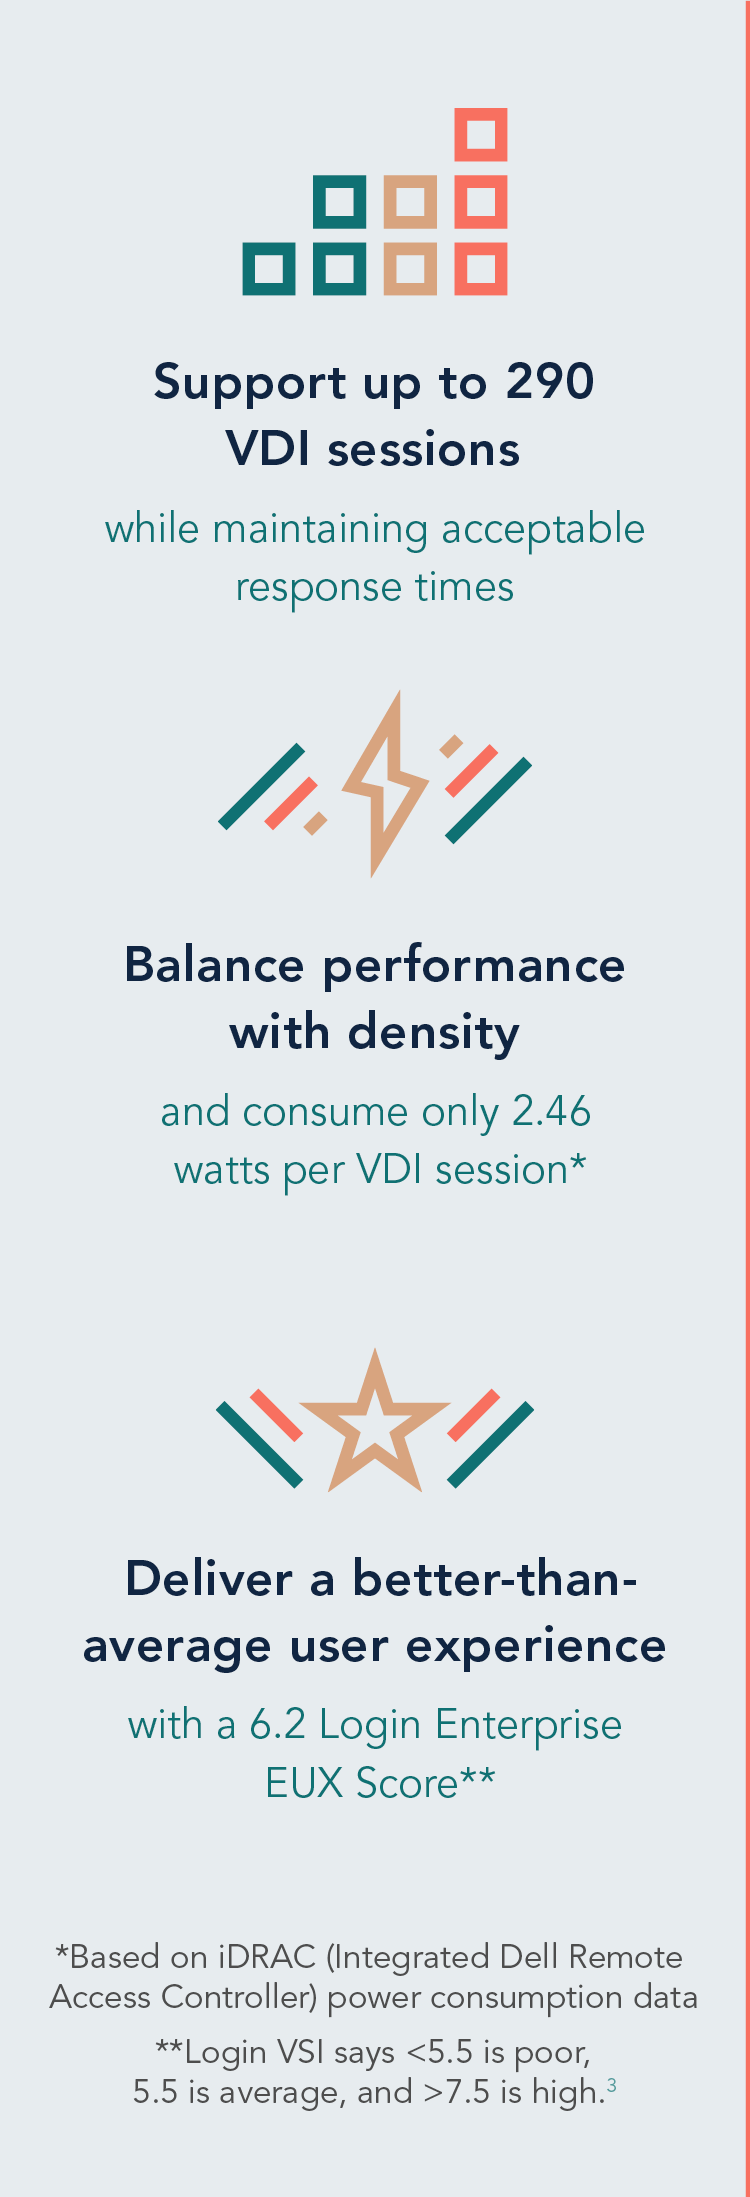 Support up to 290 VDI session while maintaining acceptable response times. Balance performance with density and consume only 2.46 watts per VDI session based on iDRAC (Integrated Dell Remote Access Controller) power consumption data. Deliver a better-than-average user experience with a 6.2 Login Enterprise EUX Score. Login VSI say <5.5 is poor, 5.5 is average, and >7.5 is high. See endnote 3.